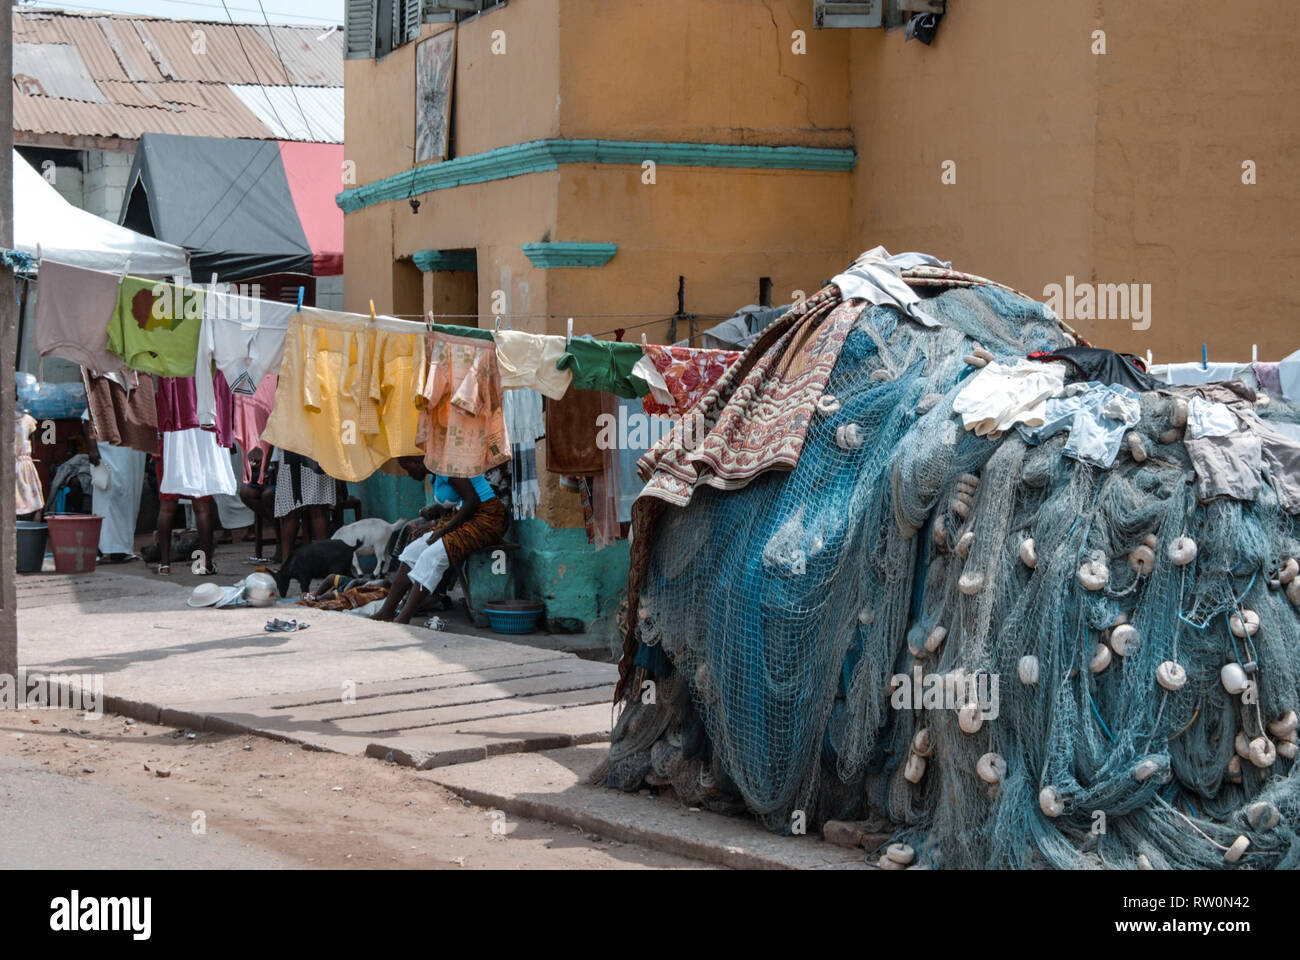 A photo of a pile of fishing net at a fisherman's yard in the town of Elmina, Ghana, West Africa Stock Photo